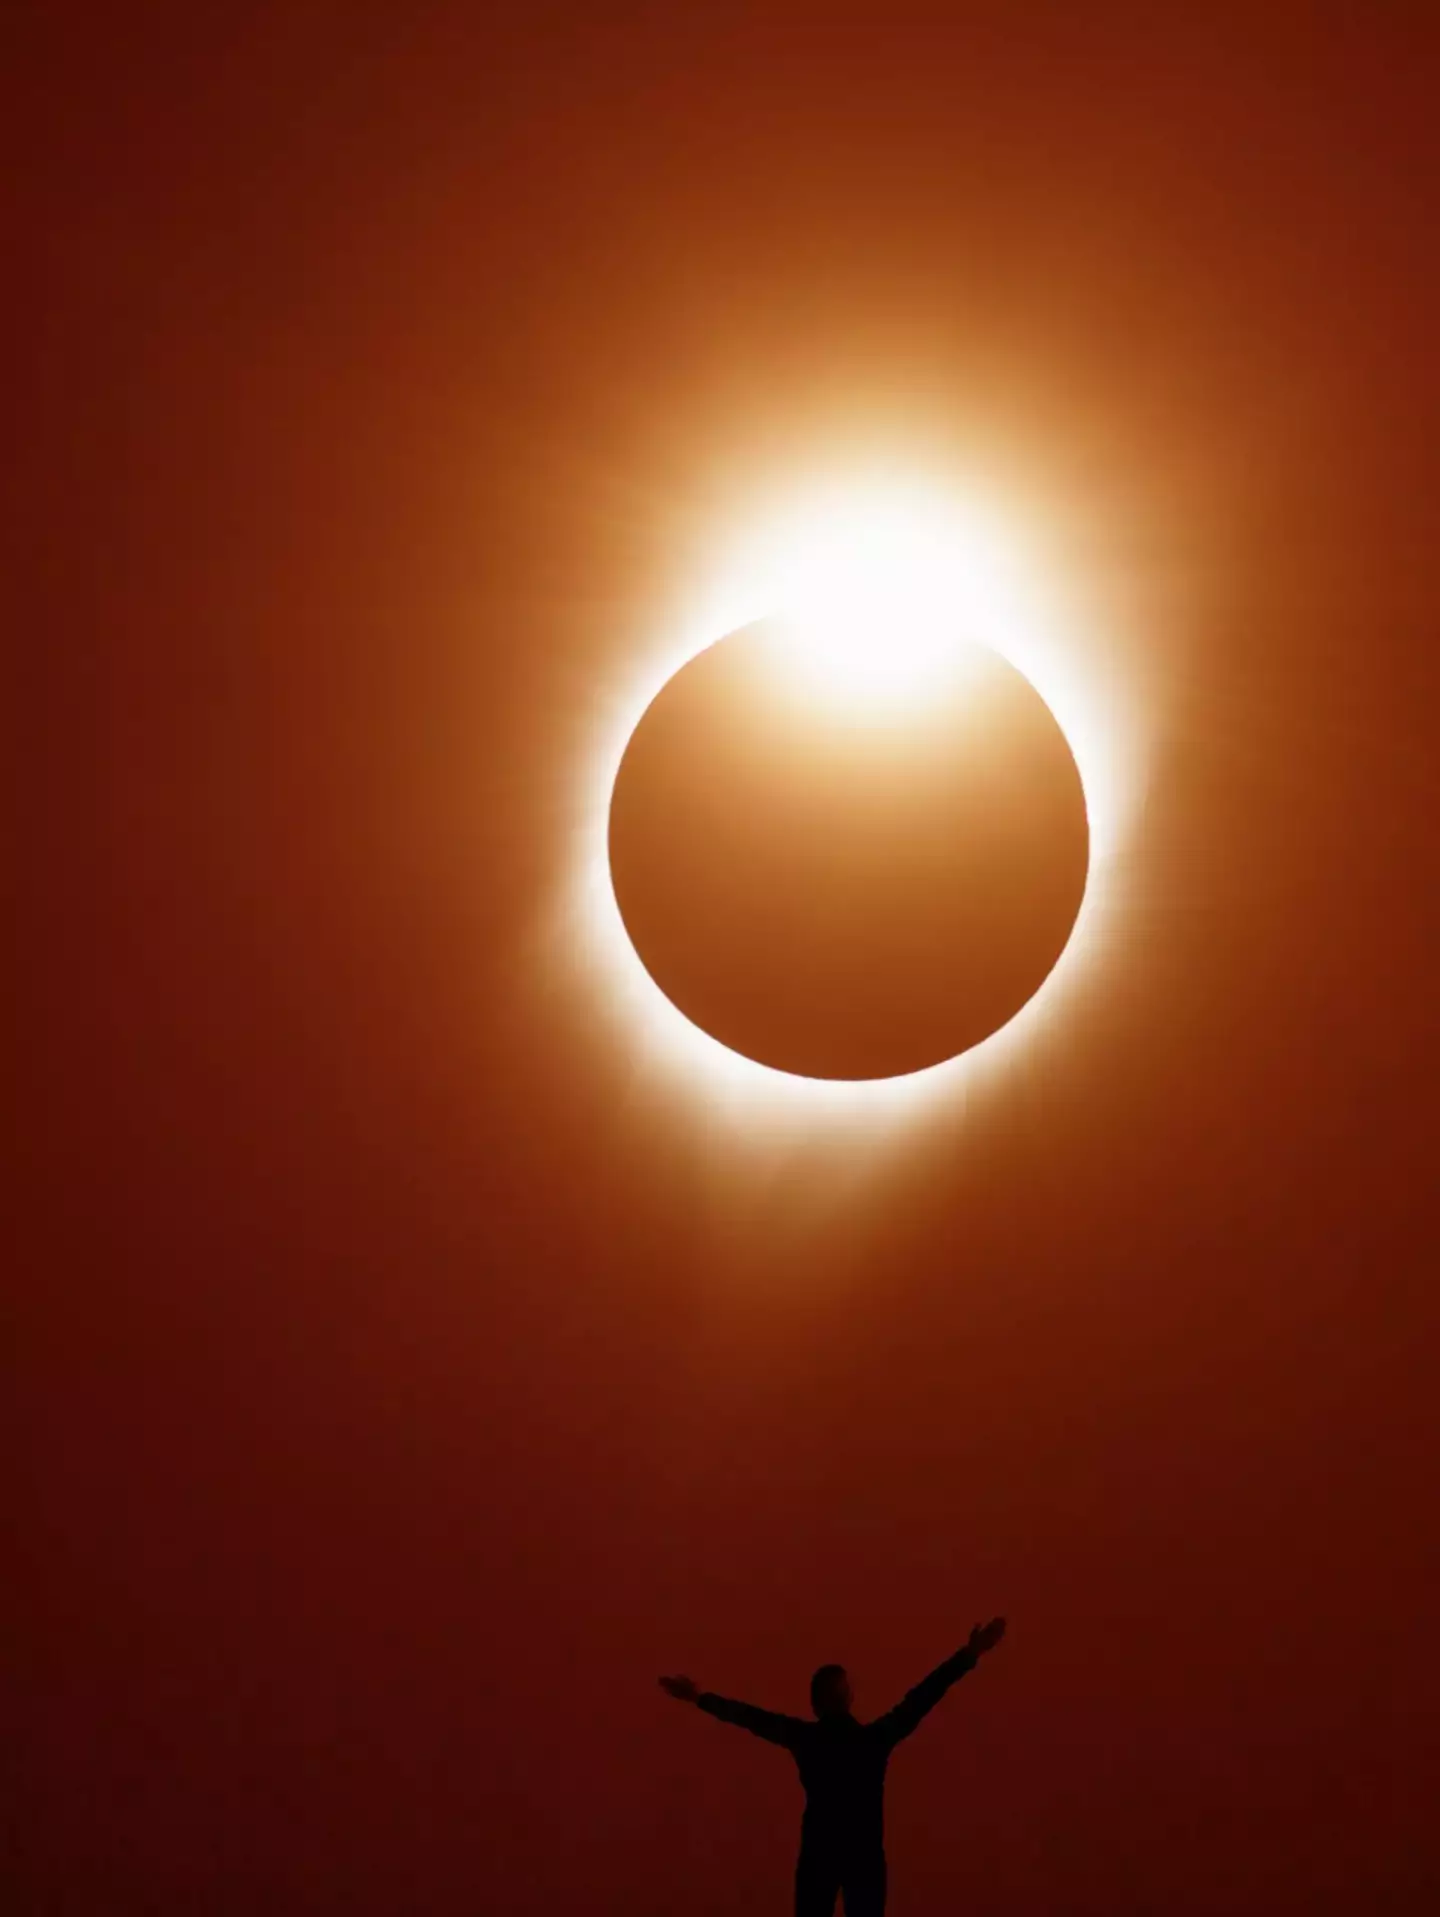 They also delved into a theory related to the 'Ring of Fire' eclipse and Elon Musk.